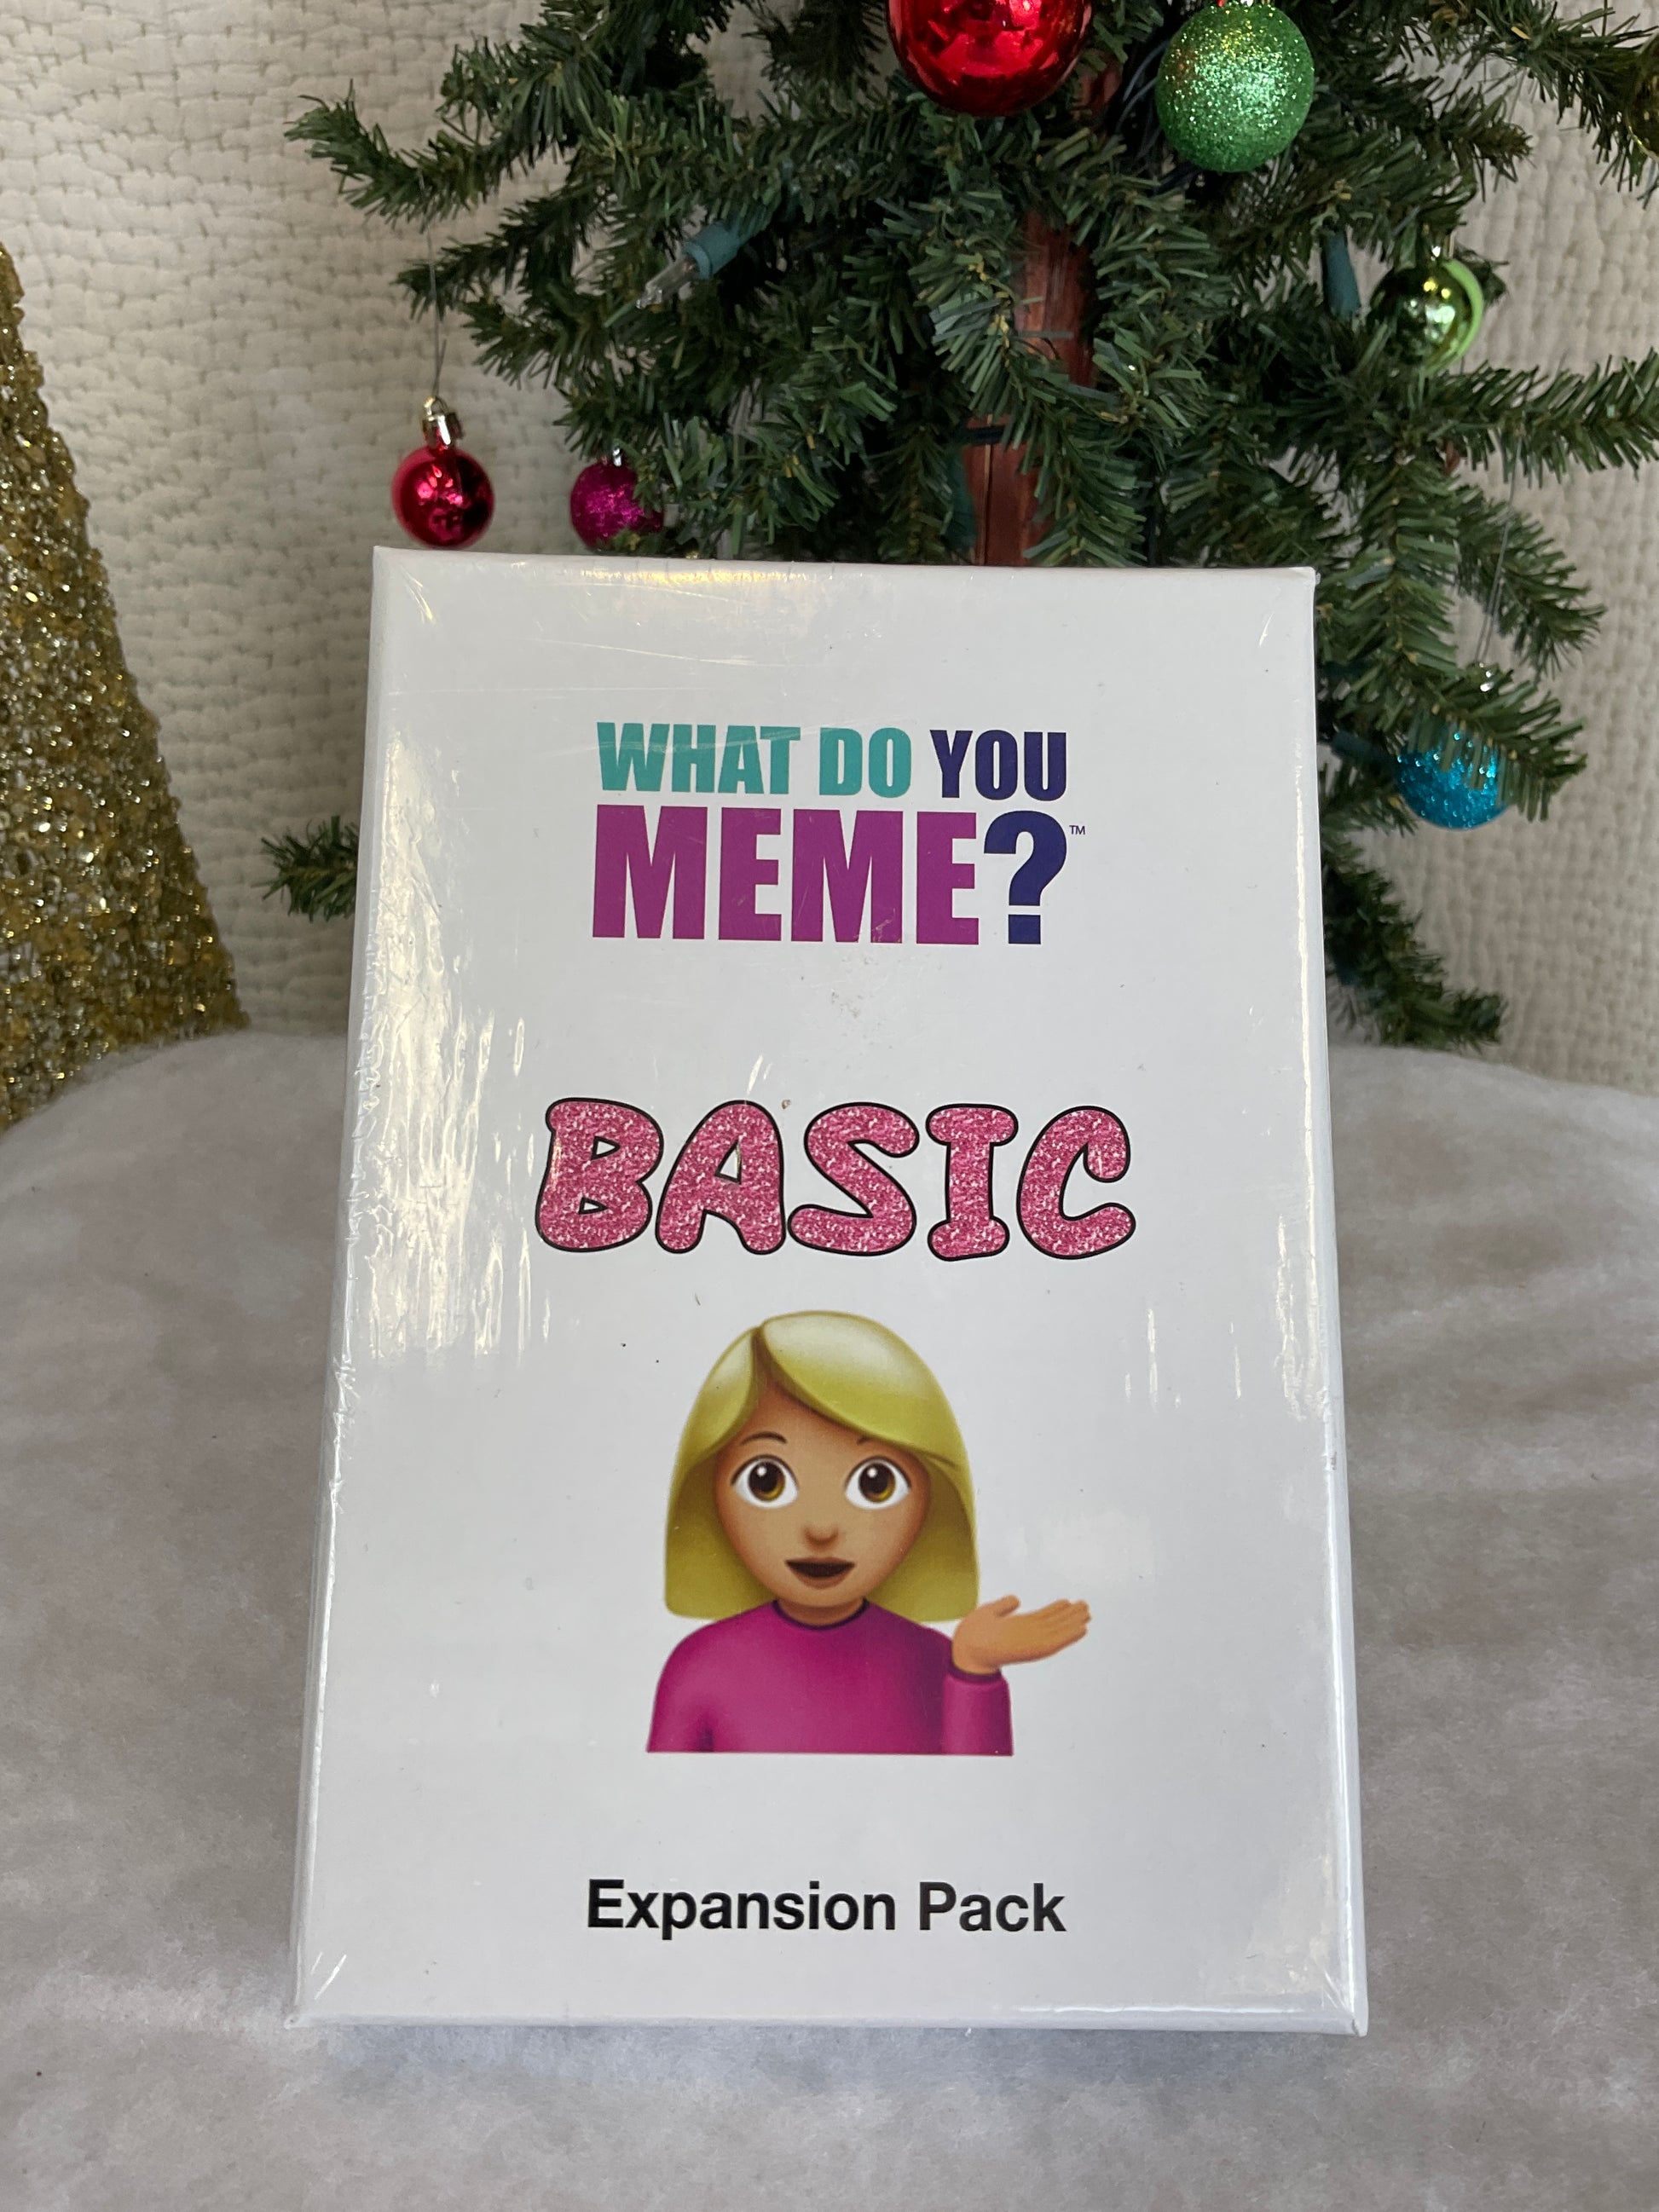  WHAT DO YOU MEME? Seinfeld Expansion Pack : Toys & Games